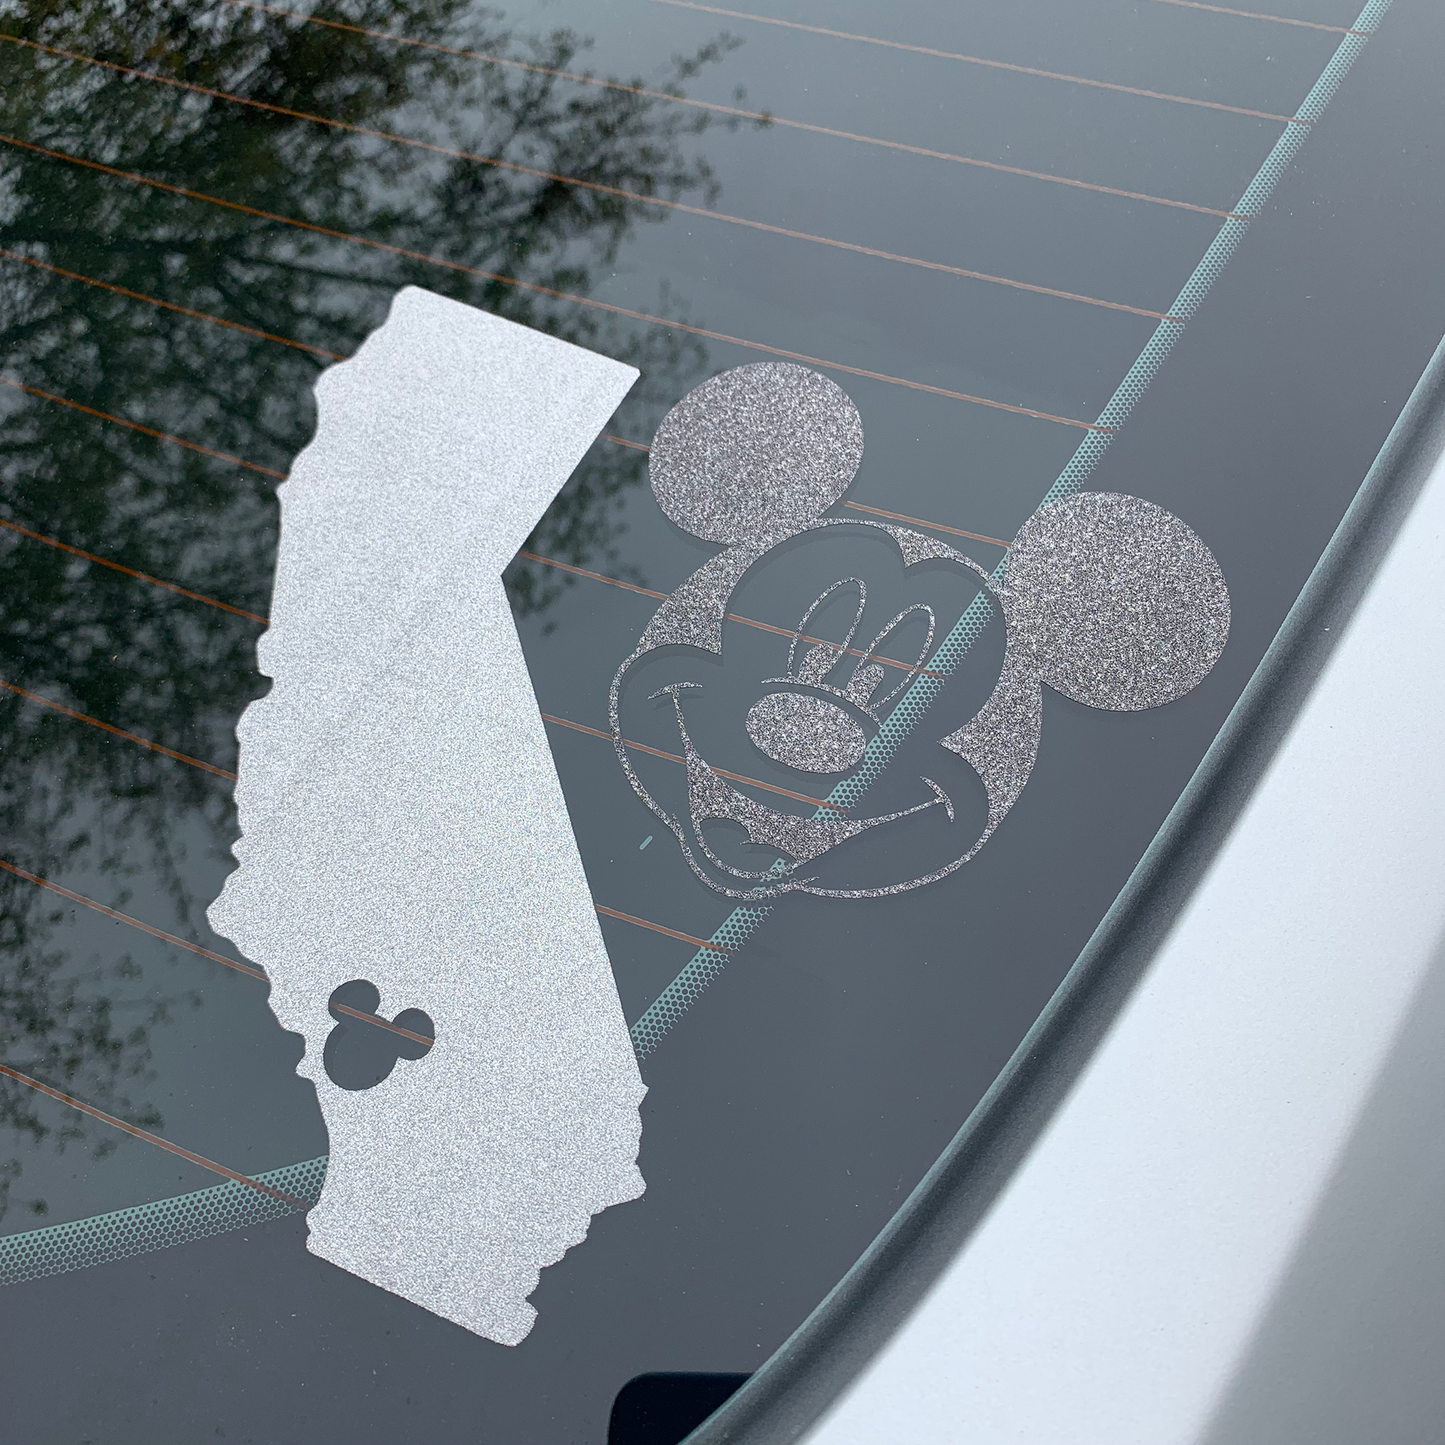 Smiling Mickey Mouse Face Vinyl Decal Sticker